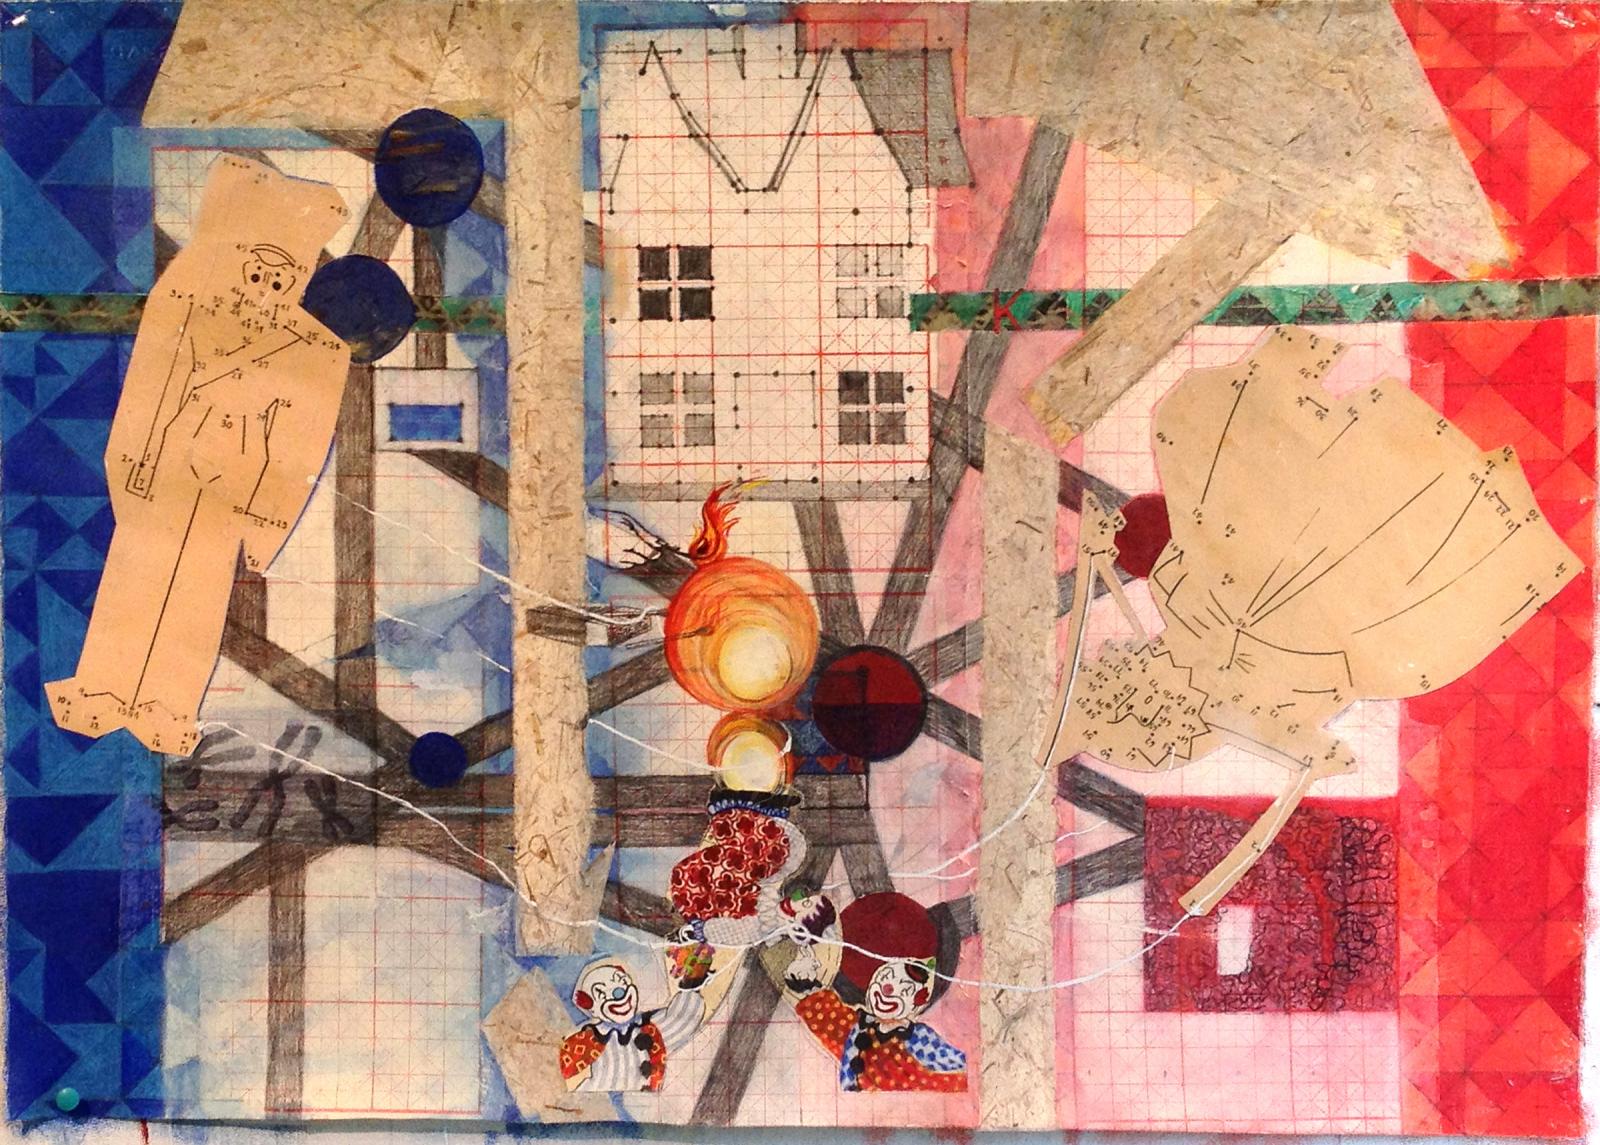 An elaborate image of the grid of DC colored red and blue with clowns playing with fire while a toy soldier puppet and princess puppet watch on